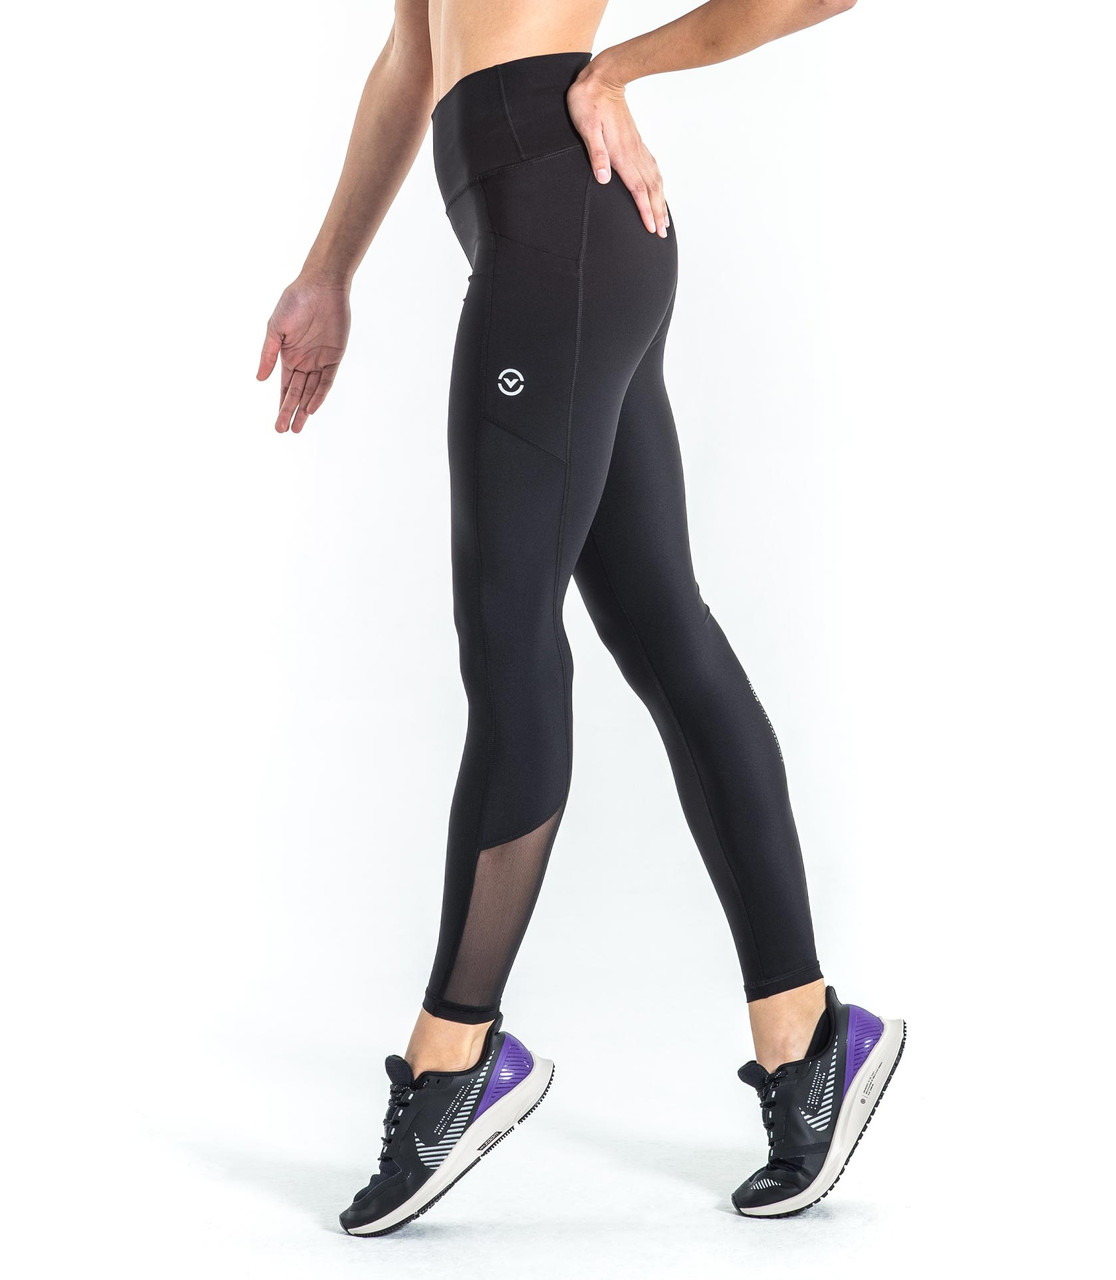 VIRUS UTILITY HIGH RISE COMPRESSION PANTS